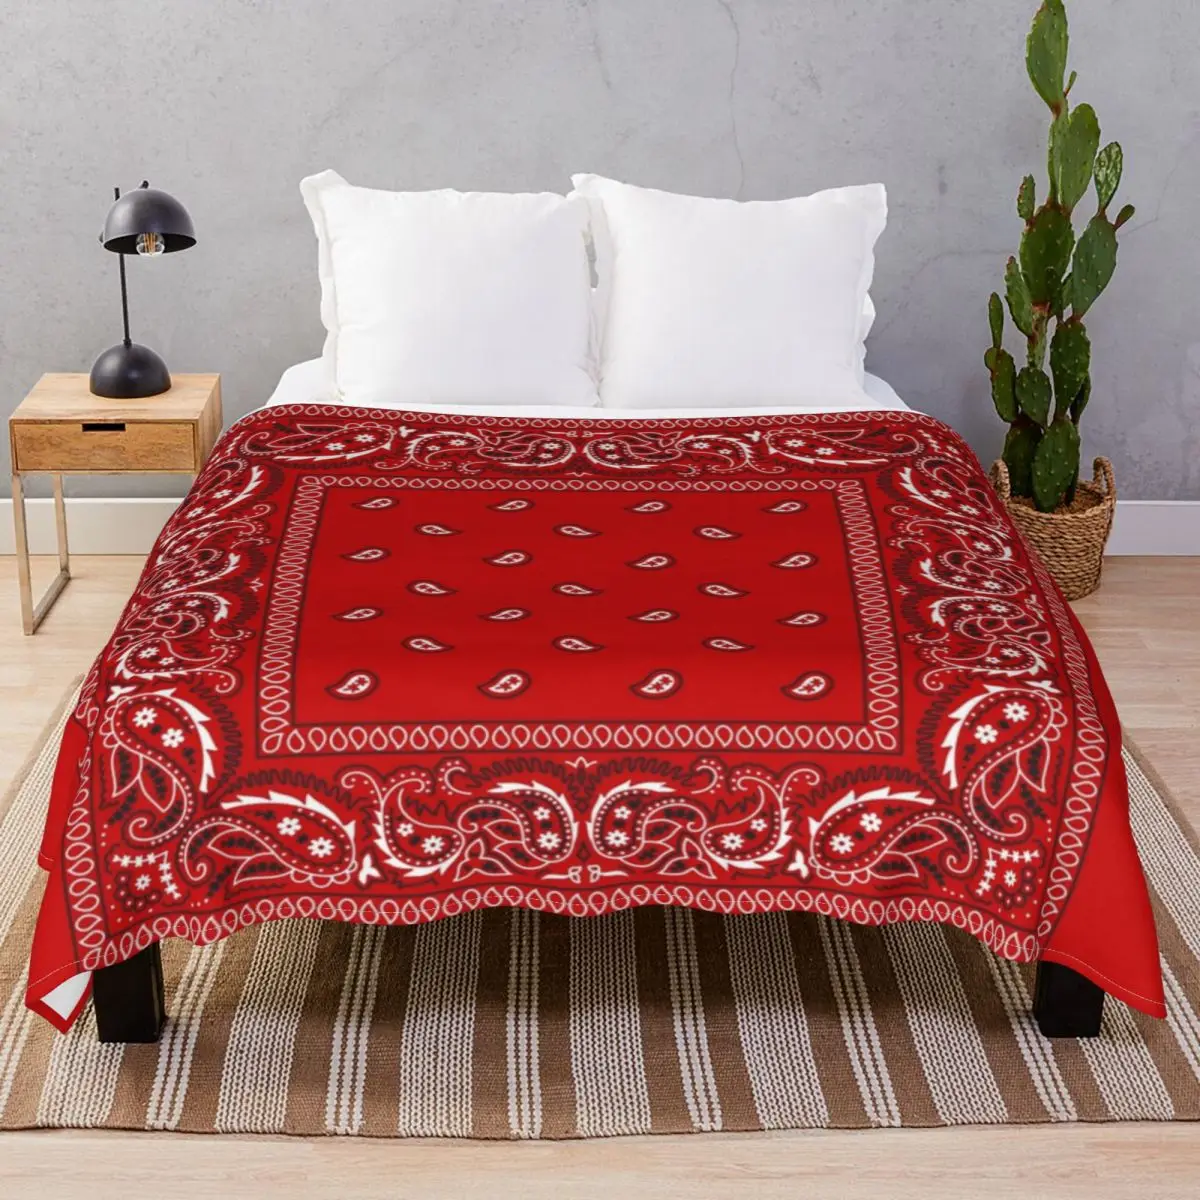 Bandana Red Blankets Flannel Print Breathable Unisex Throw Blanket for Bedding Home Couch Camp Office